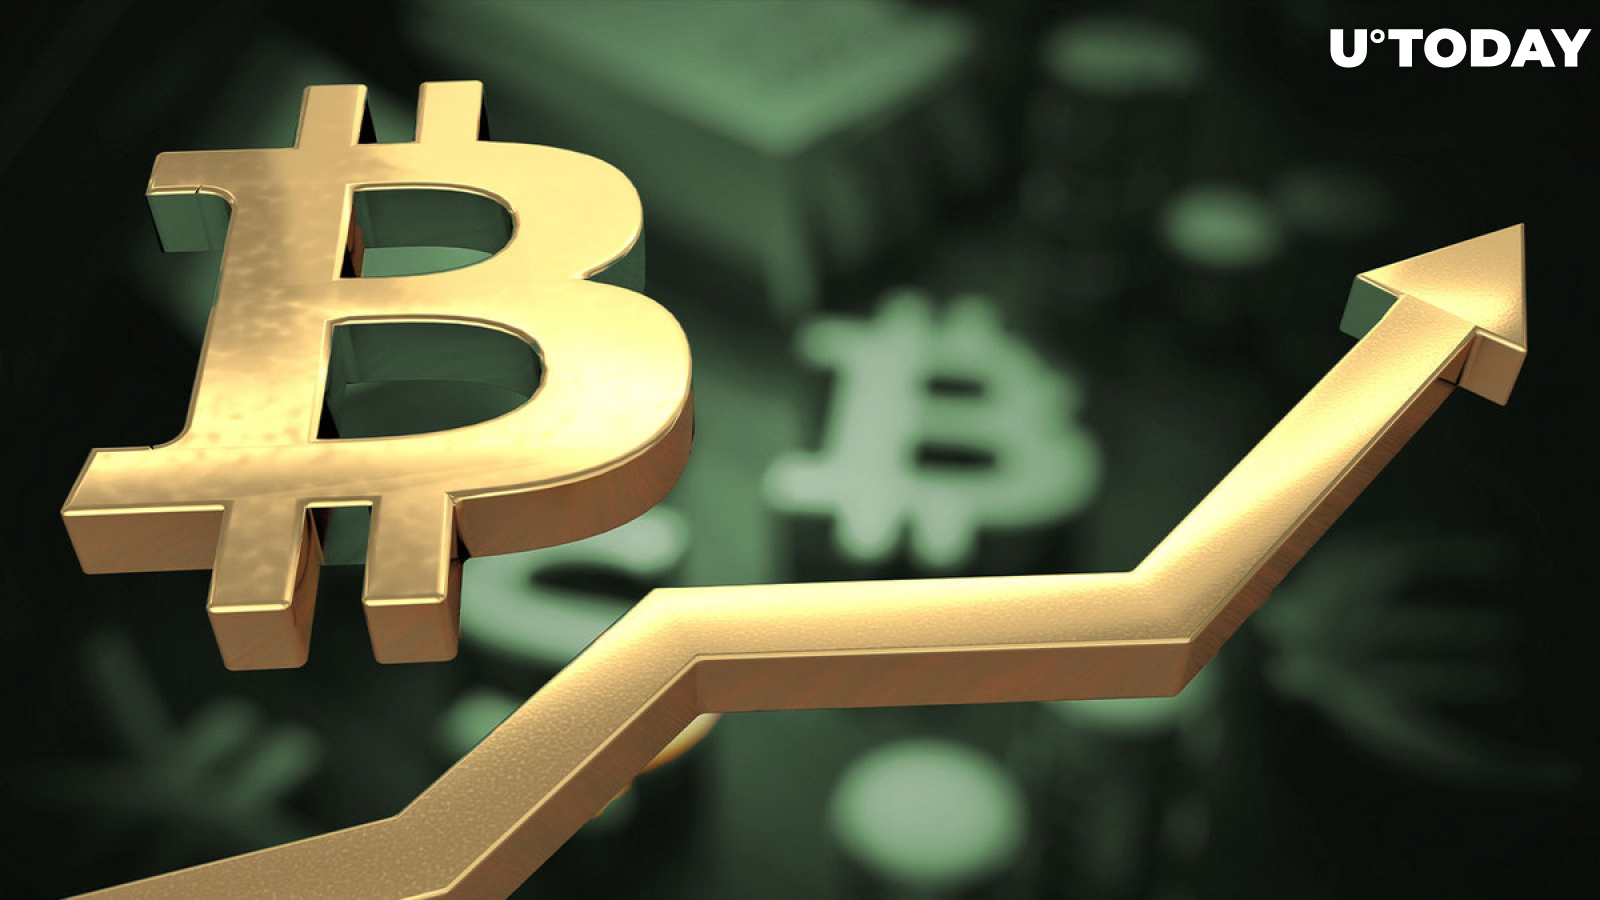 Bitcoin (BTC) Price Soars to 13-Month High: Possible Reasons